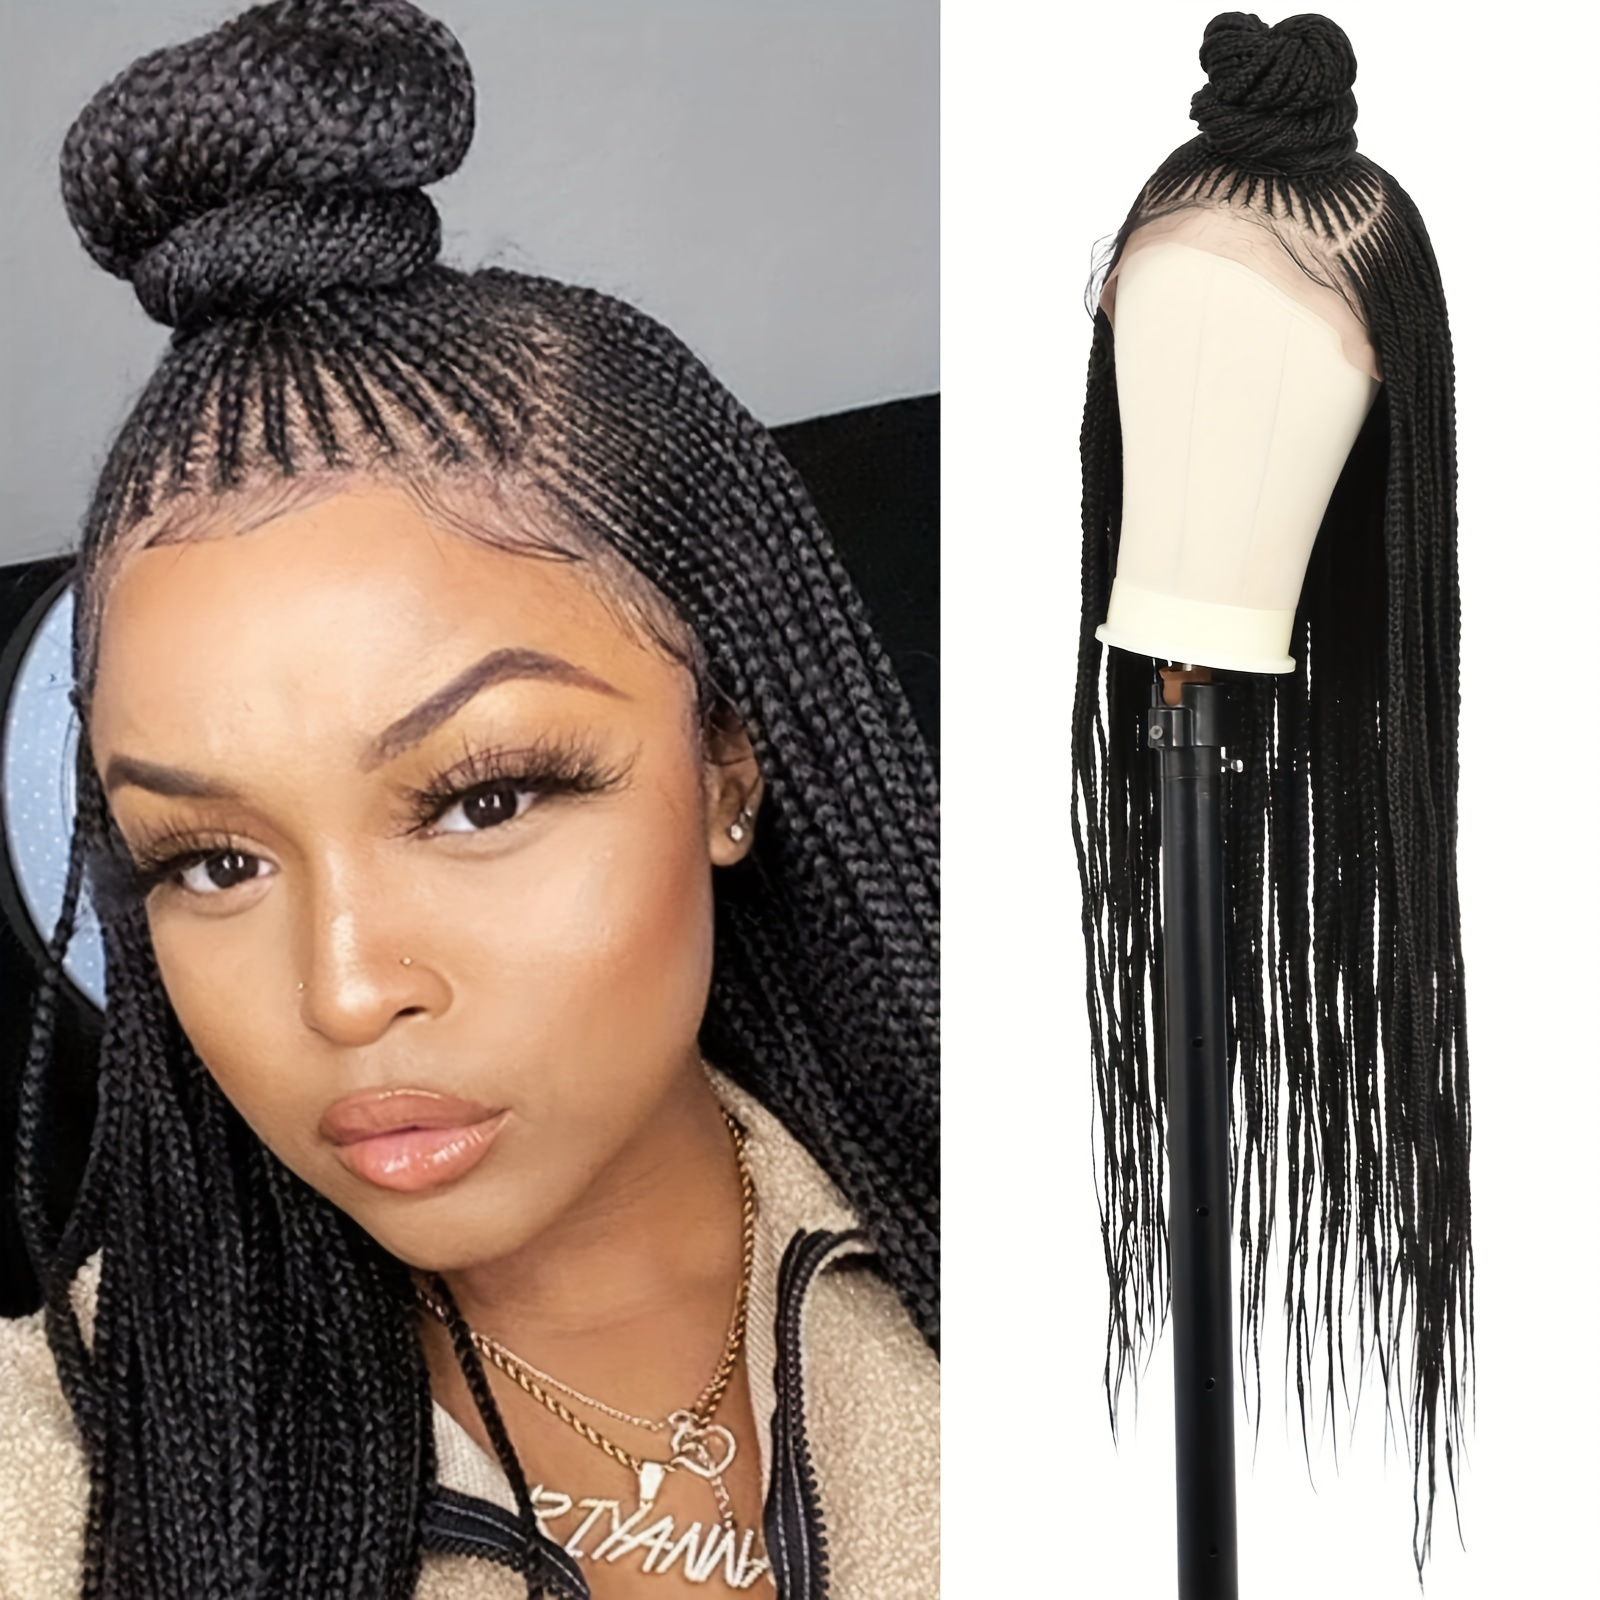 28 Inches 13x4 Braided Wigs Synthetic Lace Front Wig Updo Braided Wigs With  Baby Hair For Black Women Cornrow Box Braided Wig From Newfantasyhair,  $42.97